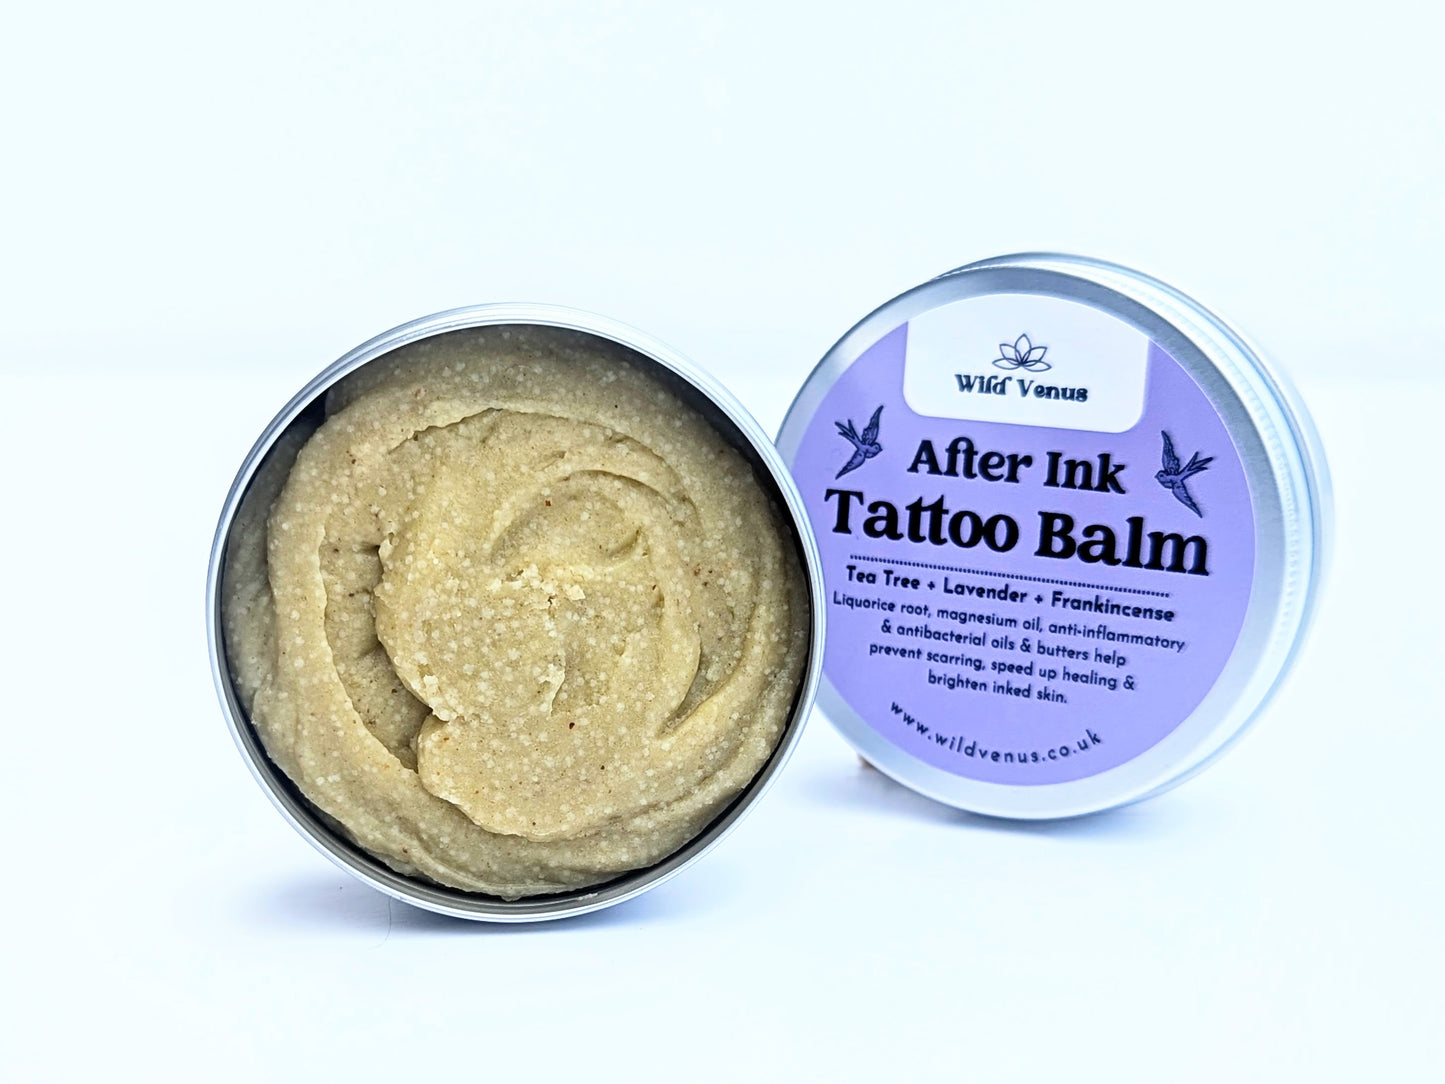 An open tin of the After Ink tattoo balm against a white background. The tin lid is tucked behind the balm. The balm shows a deep rich colour and texture. 